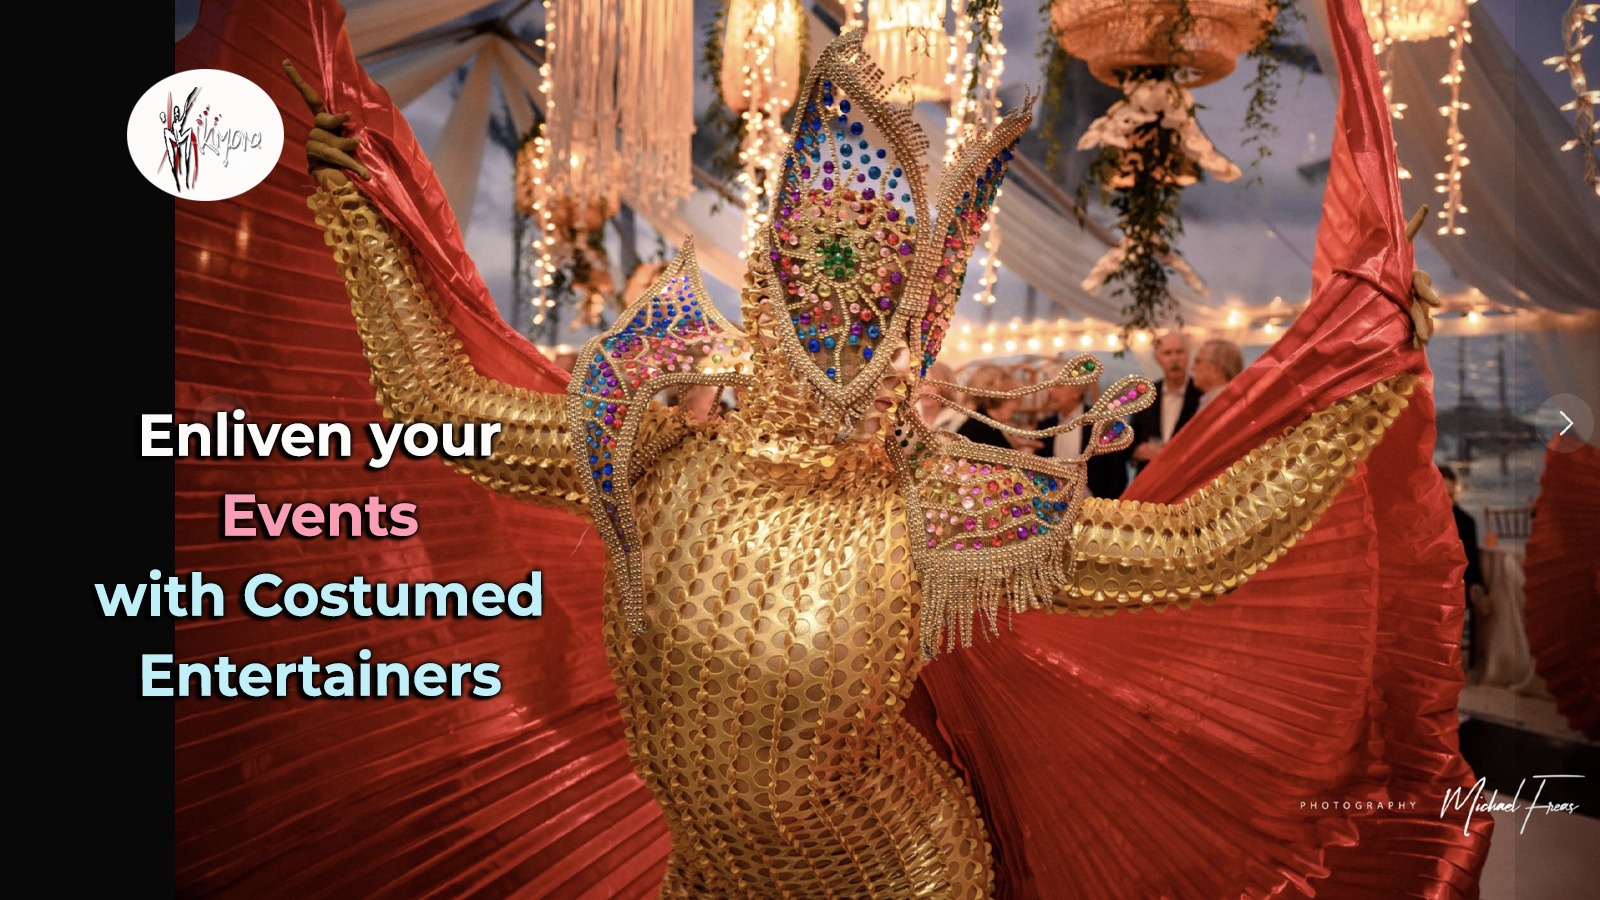 A picture of a gold shine costume performer with the title "Enliven your Events with Costumed Entertainers"